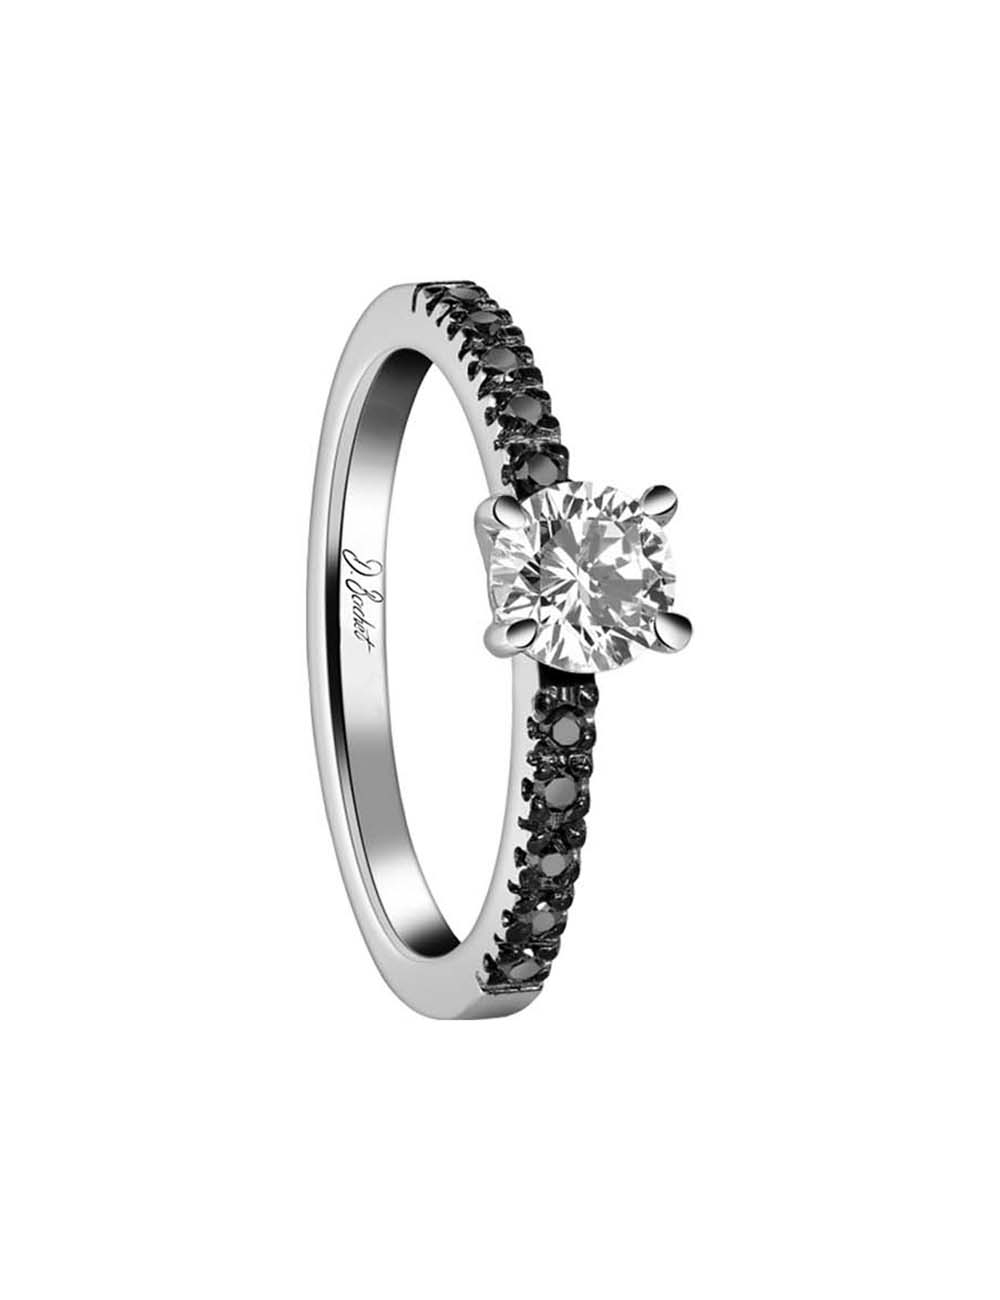 Modern engagement ring for women set with a 0.50 carat white diamond and black diamonds